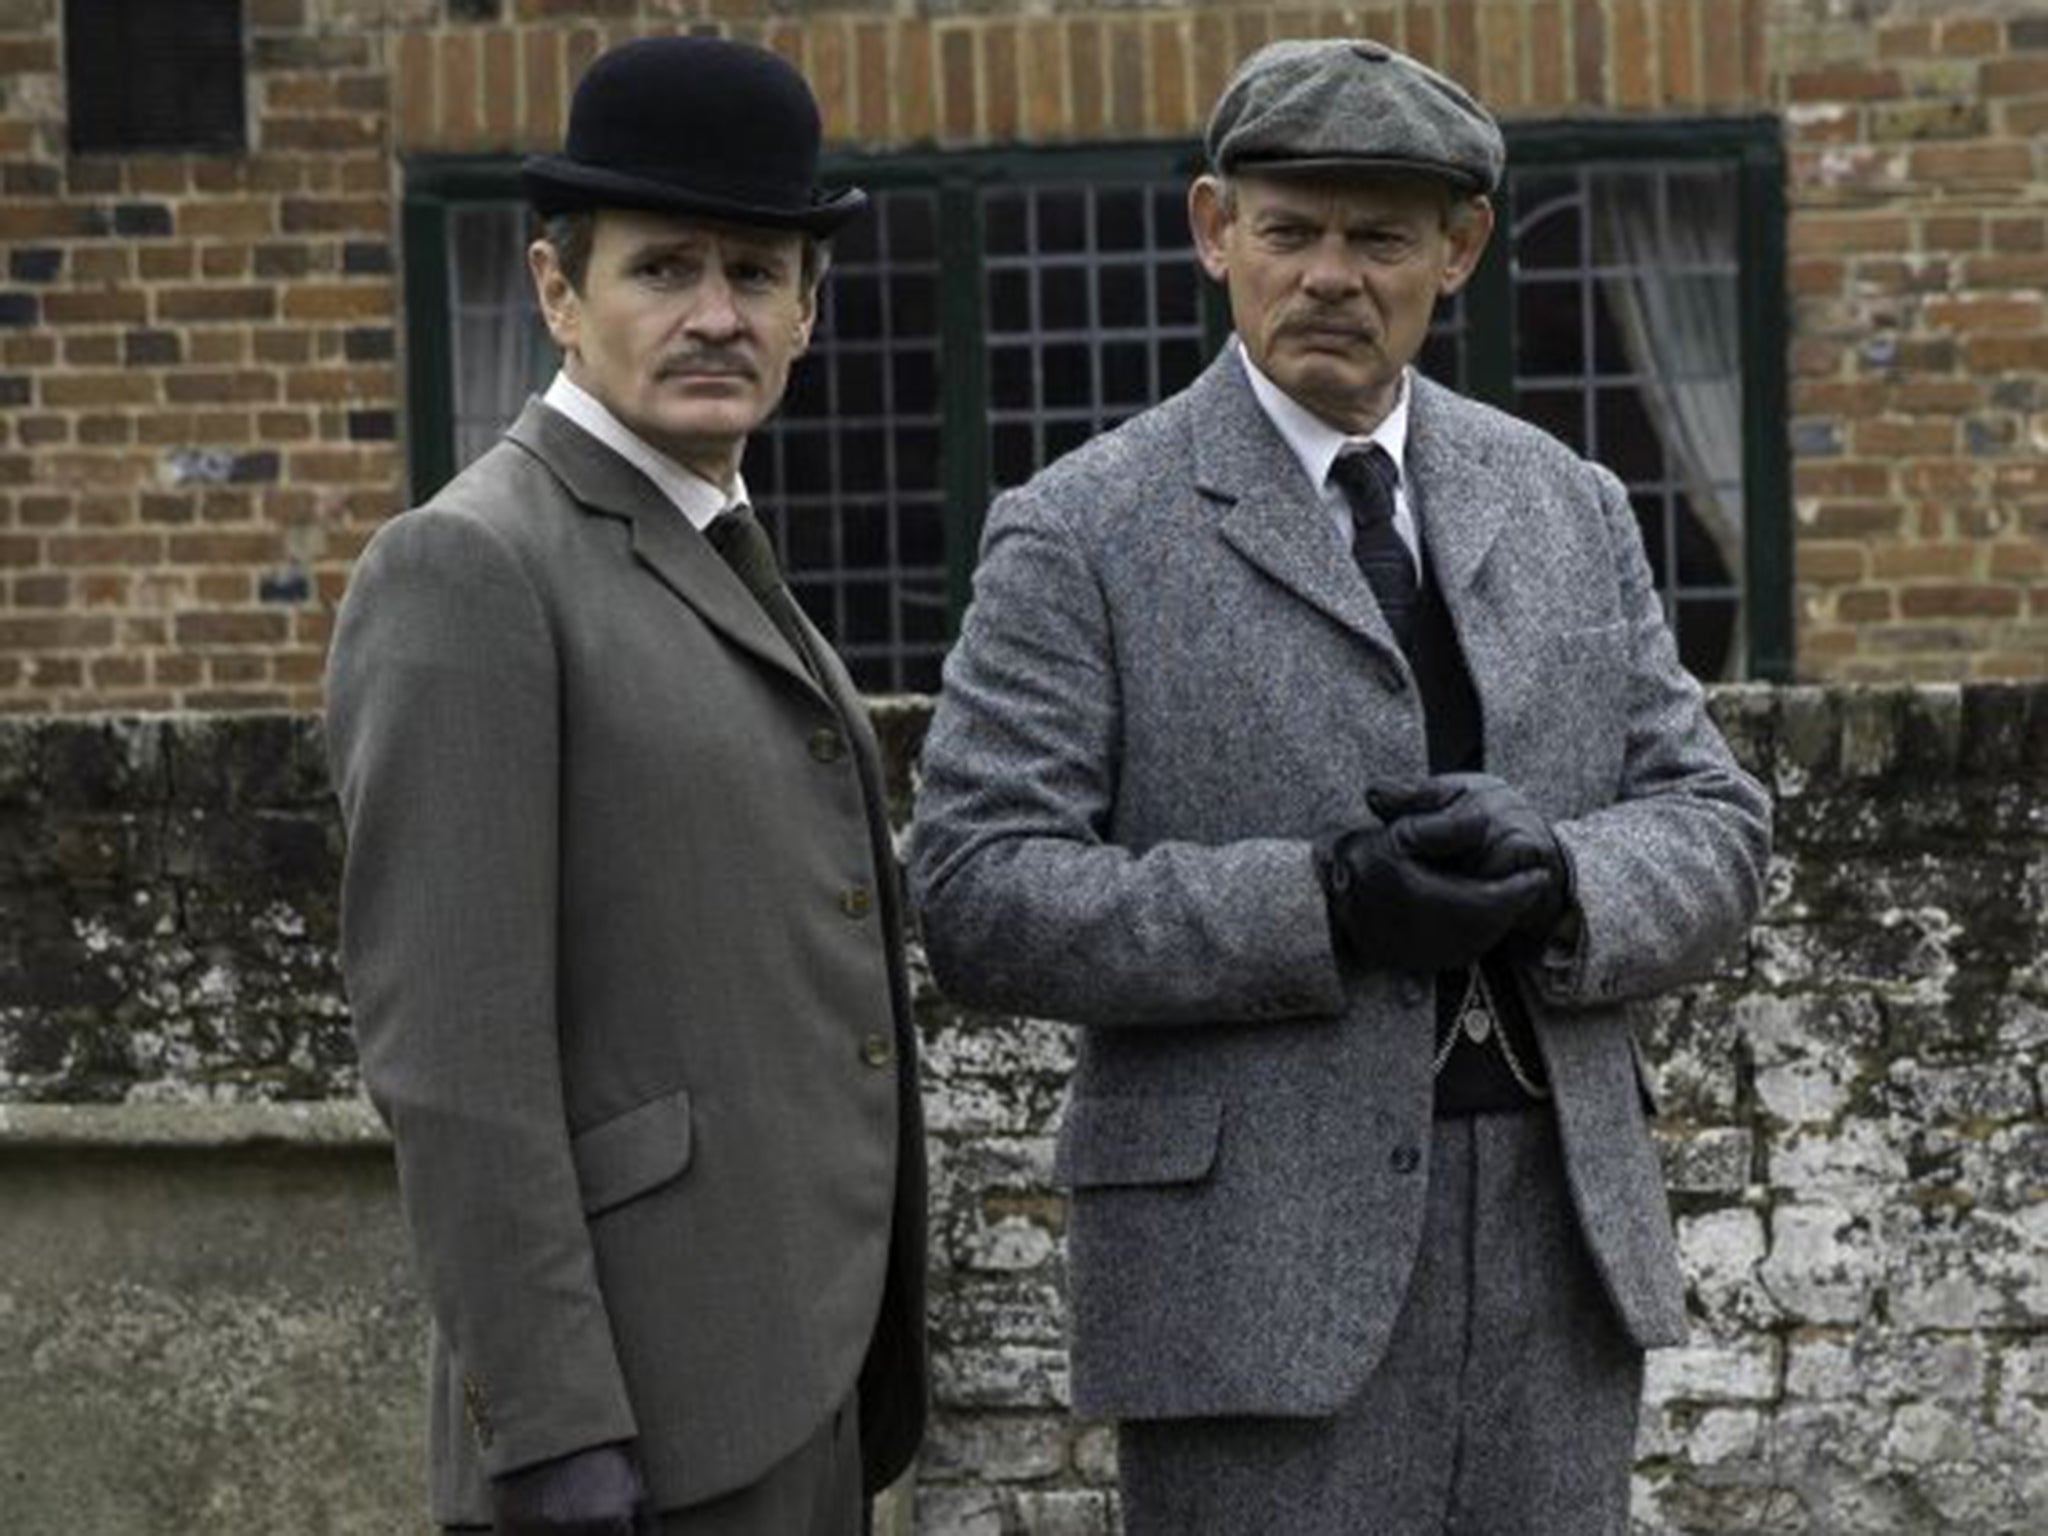 Martin Clunes in Arthur & George with co-star Charles Edwards